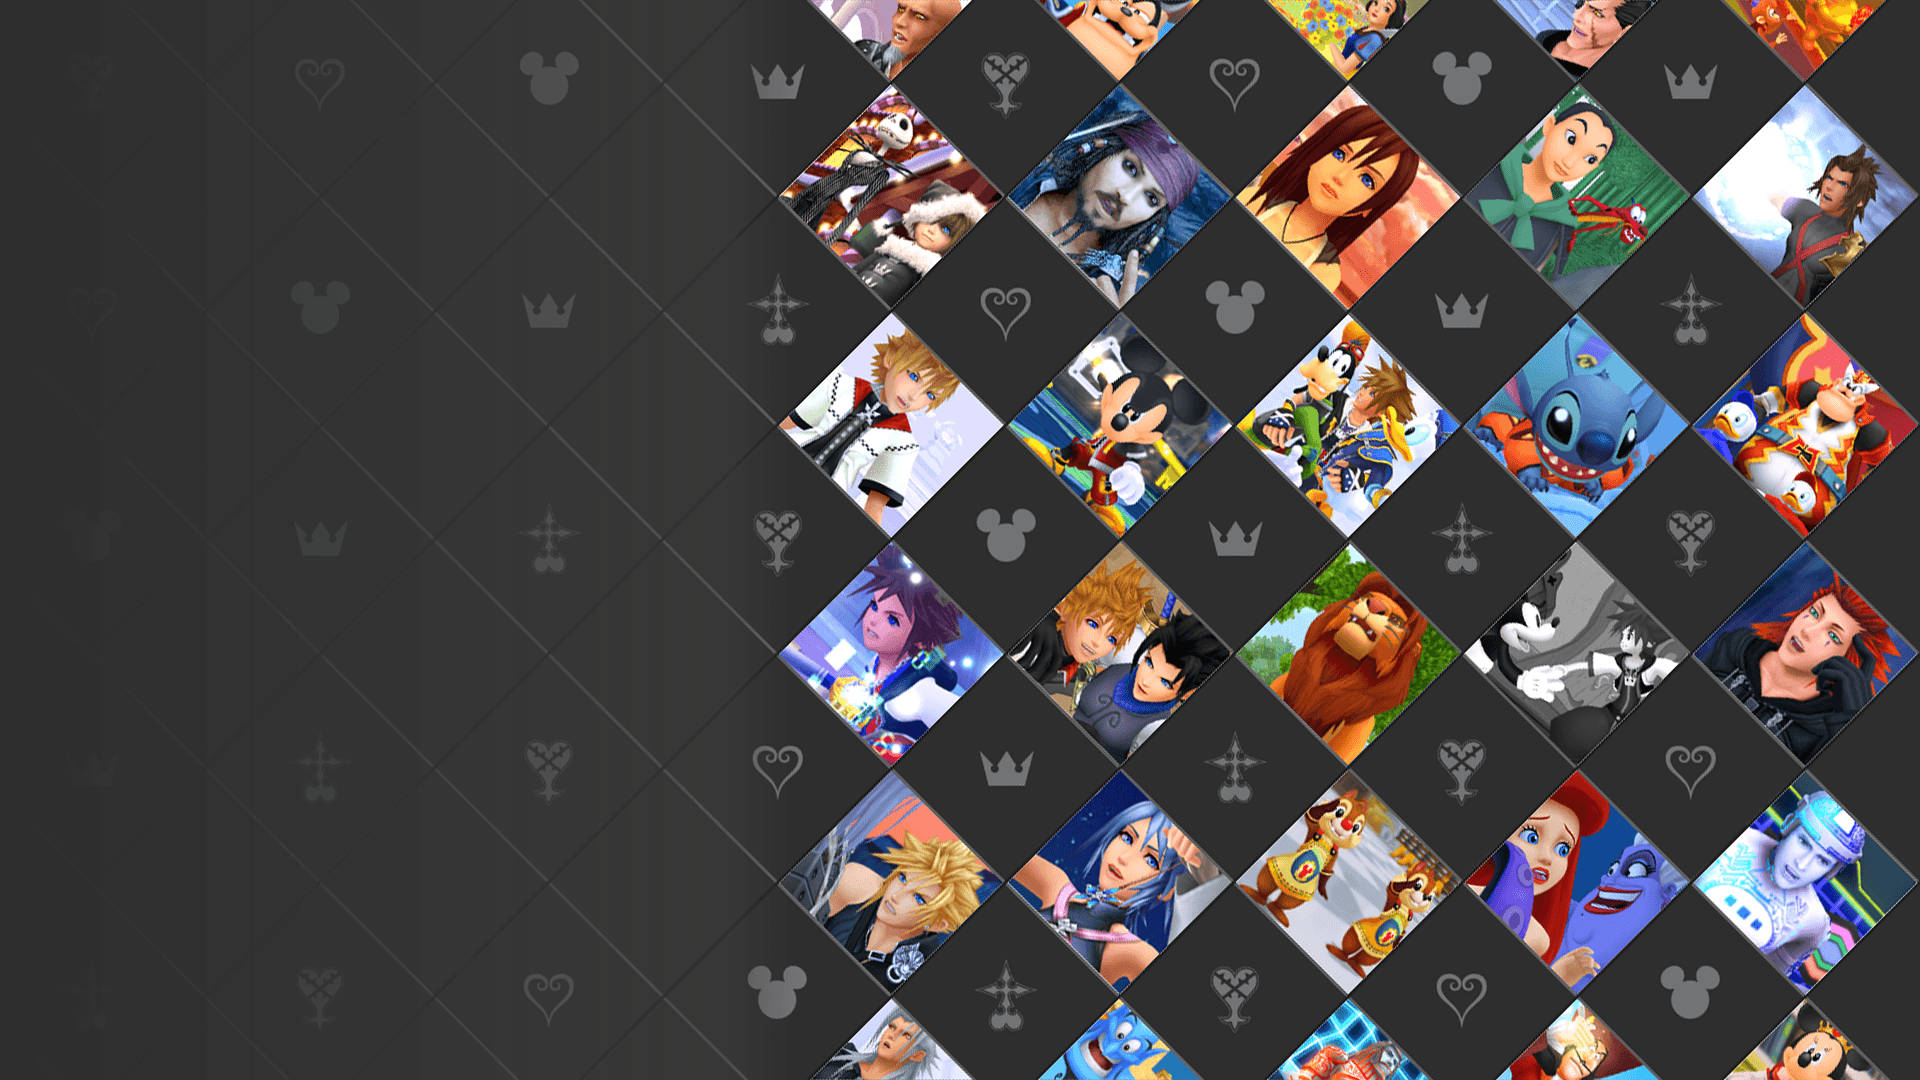 Sora, Donald Duck, and Goofy begin their adventure in the world of Kingdom Hearts Wallpaper